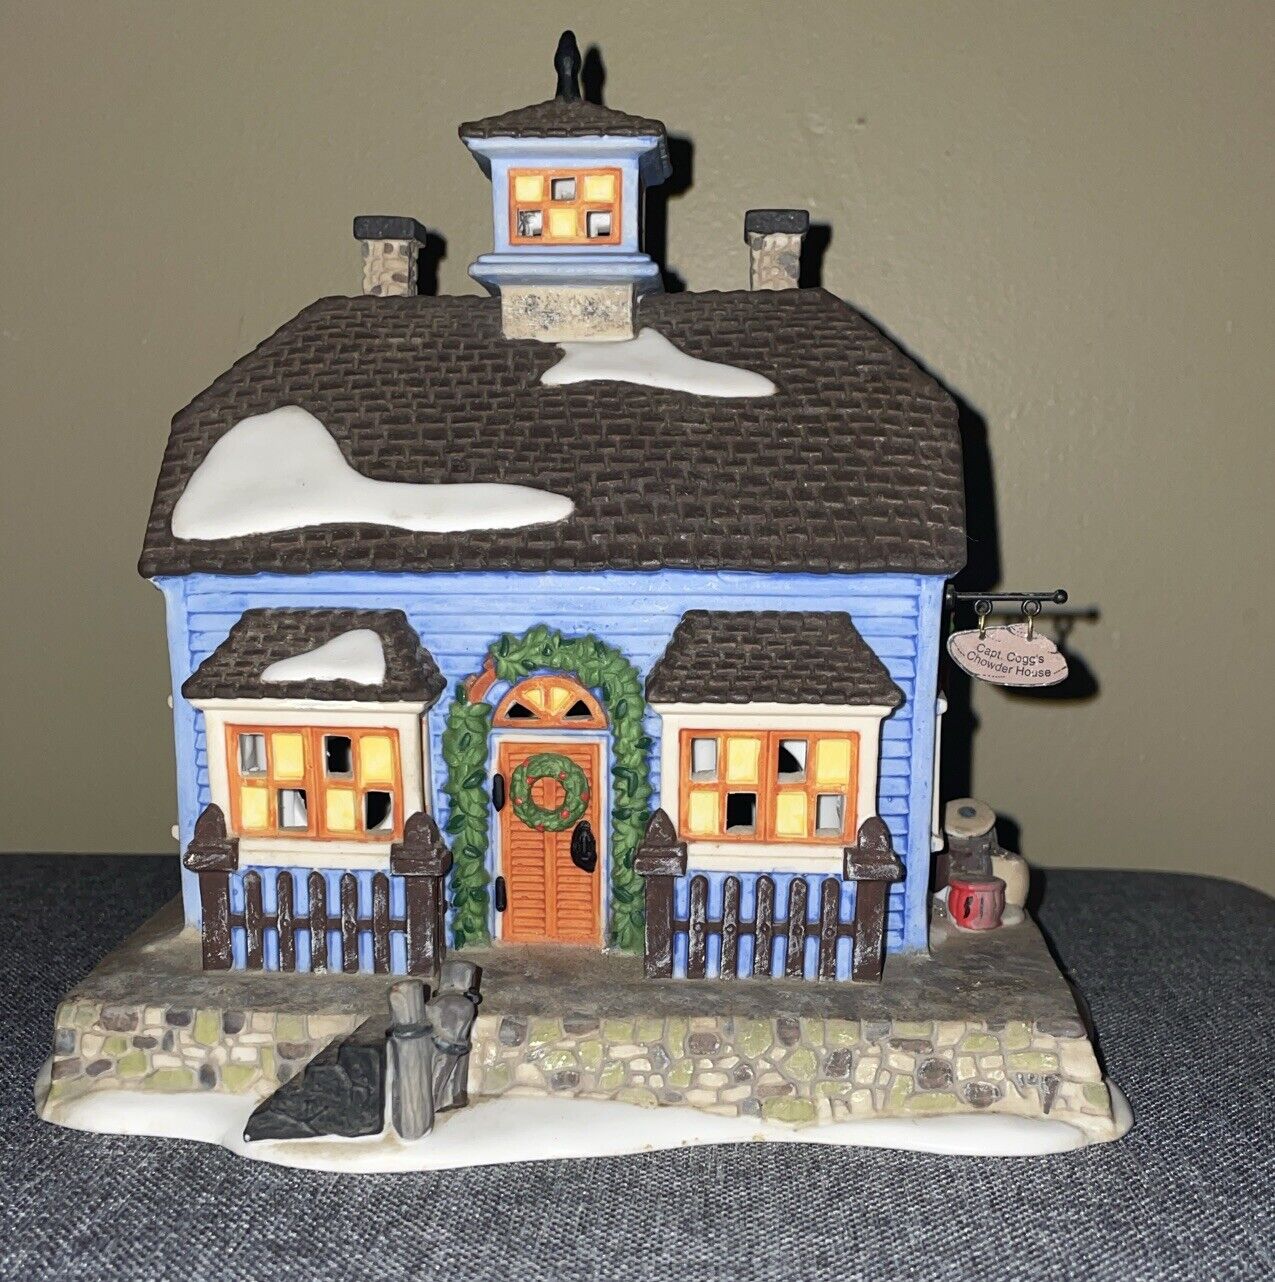 1995-DEPT. 56 - “Chowder House” New England Village Collection Series